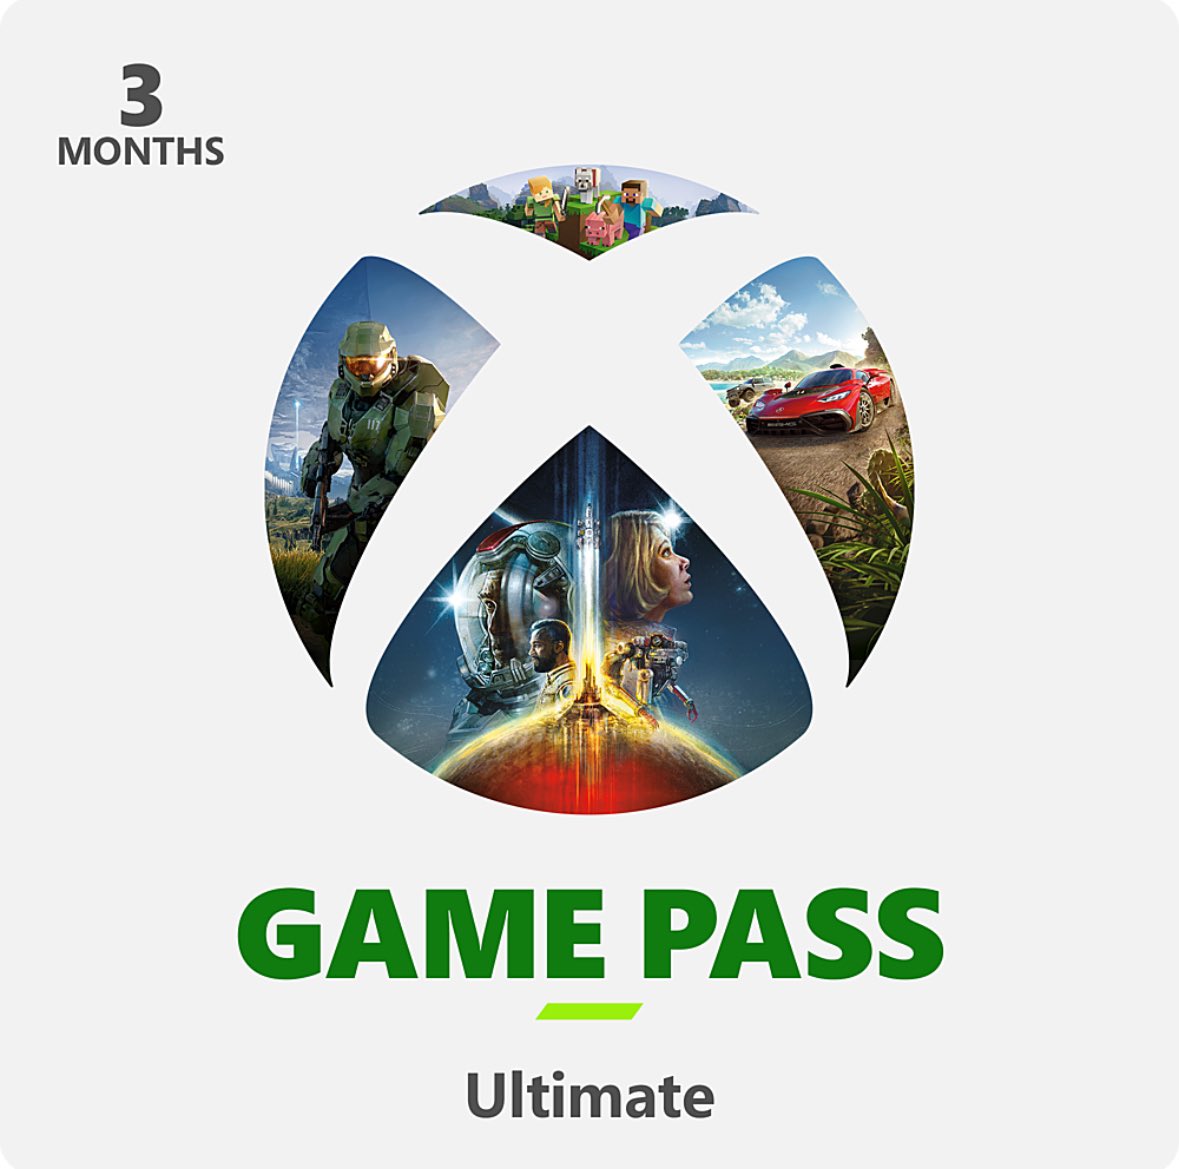 ❎Game Pass Ultimate Giveaway❎ Giving away a free 3 Month Game Pass Ultimate for NEW USERS ONLY Winner will be DM’d Follow, Repost, like and comment #Xbox4Eva to enter!